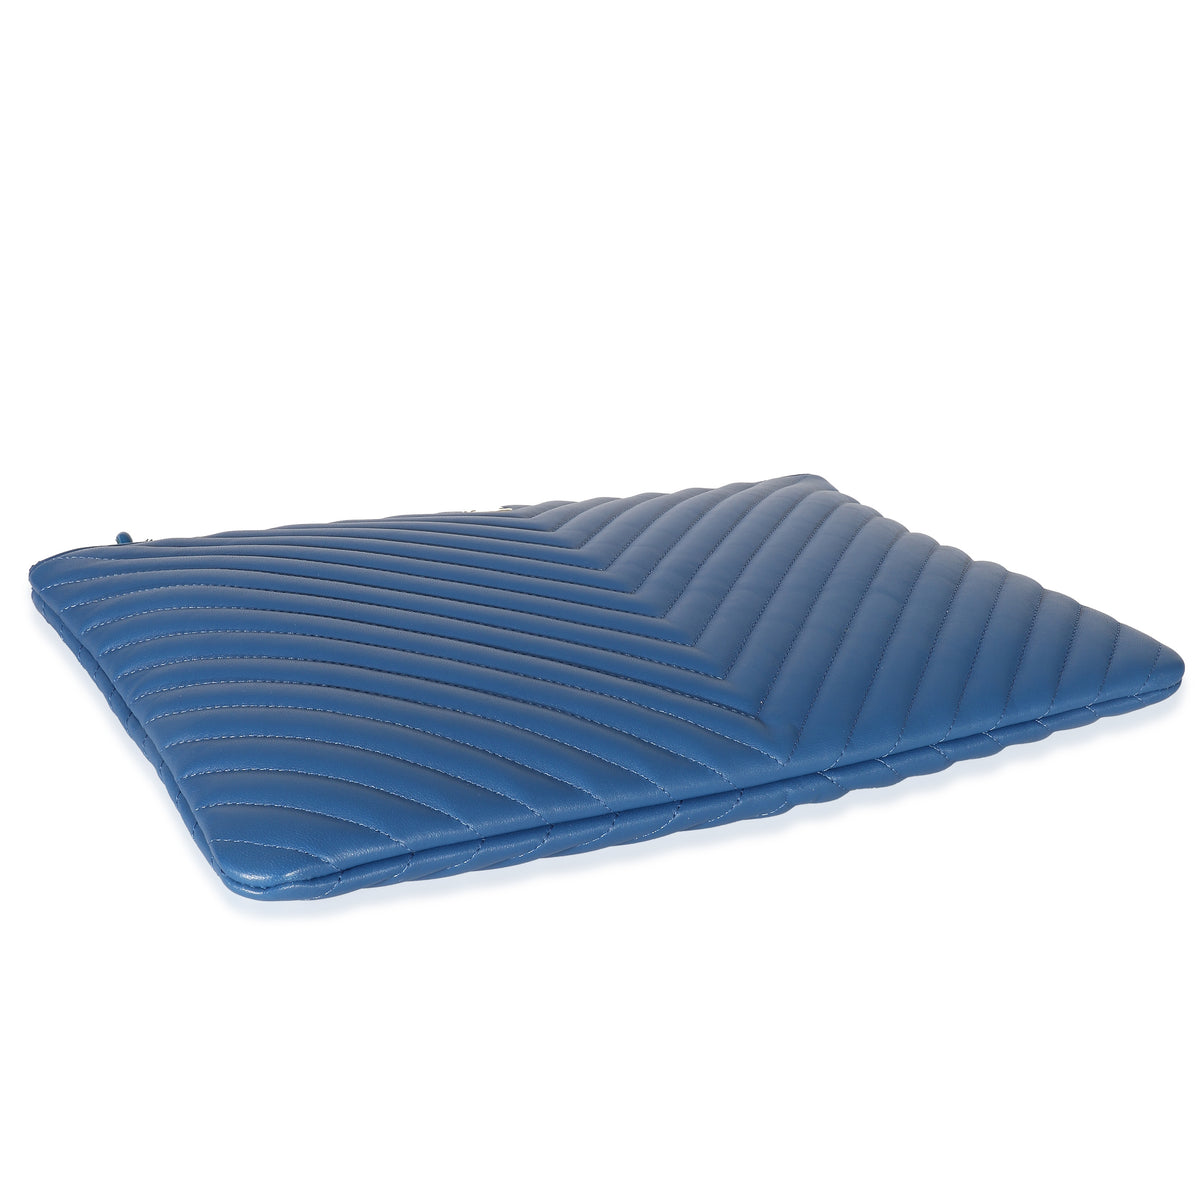 Blue Quilted Chevron Lambskin Large O Case